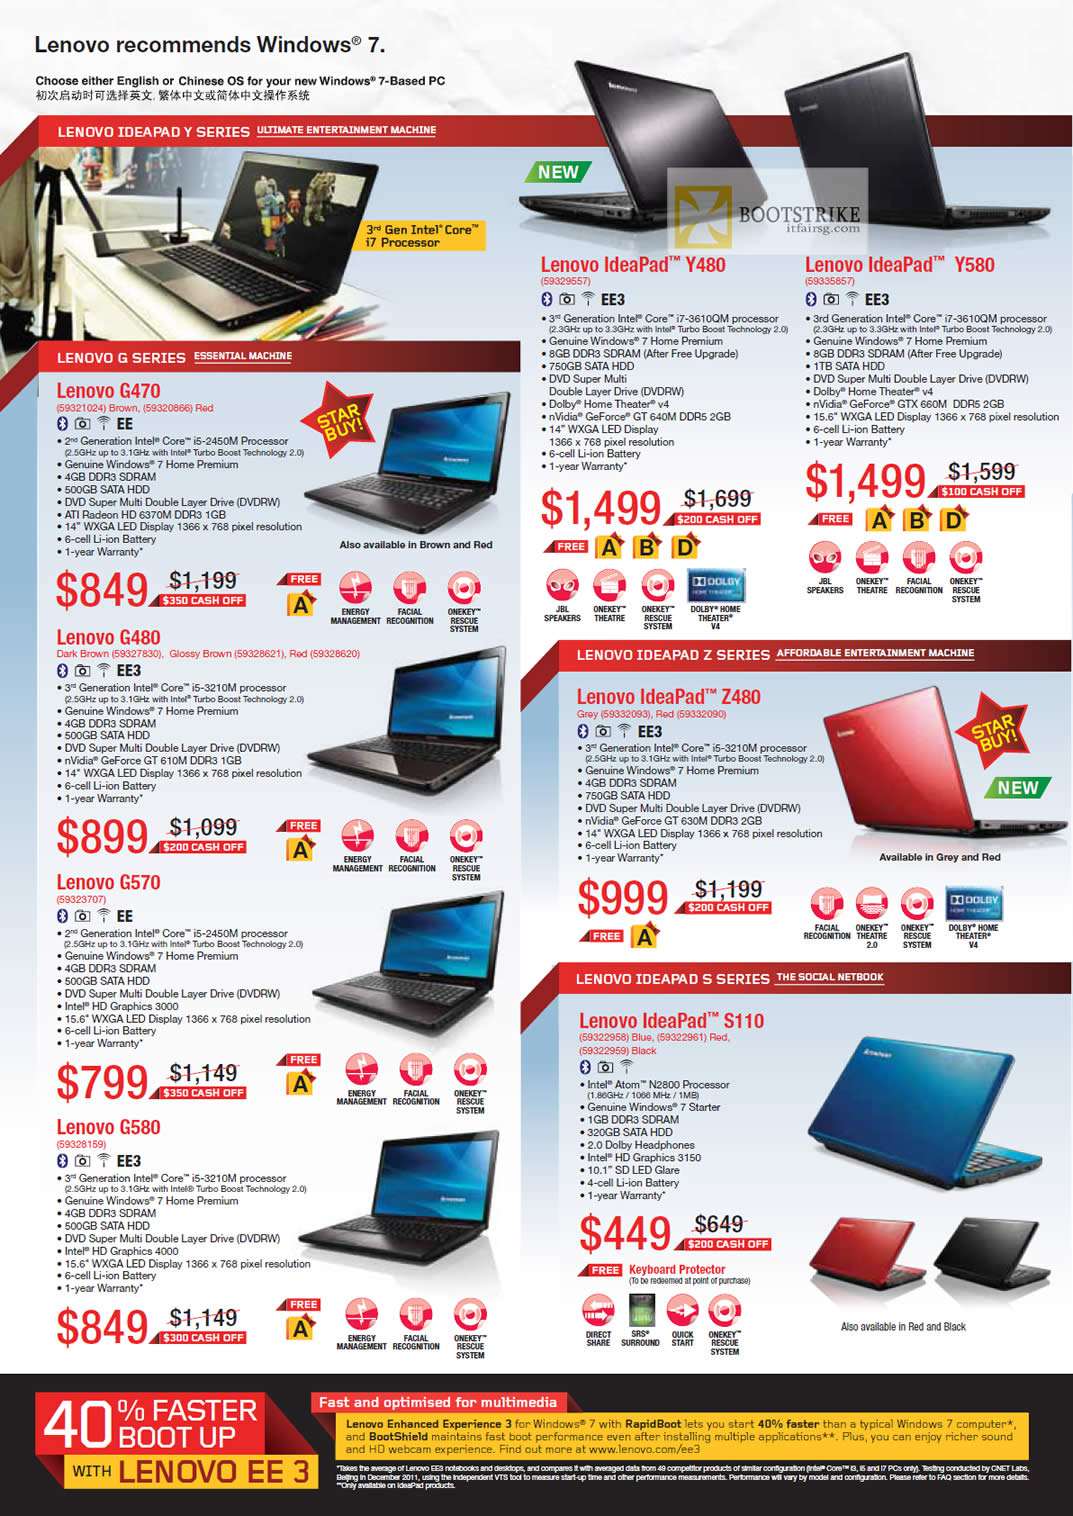 PC SHOW 2012 price list image brochure of Lenovo Notebooks IdeaPad Y480, Y580, Z480, S110, G470, G480, G570, G580